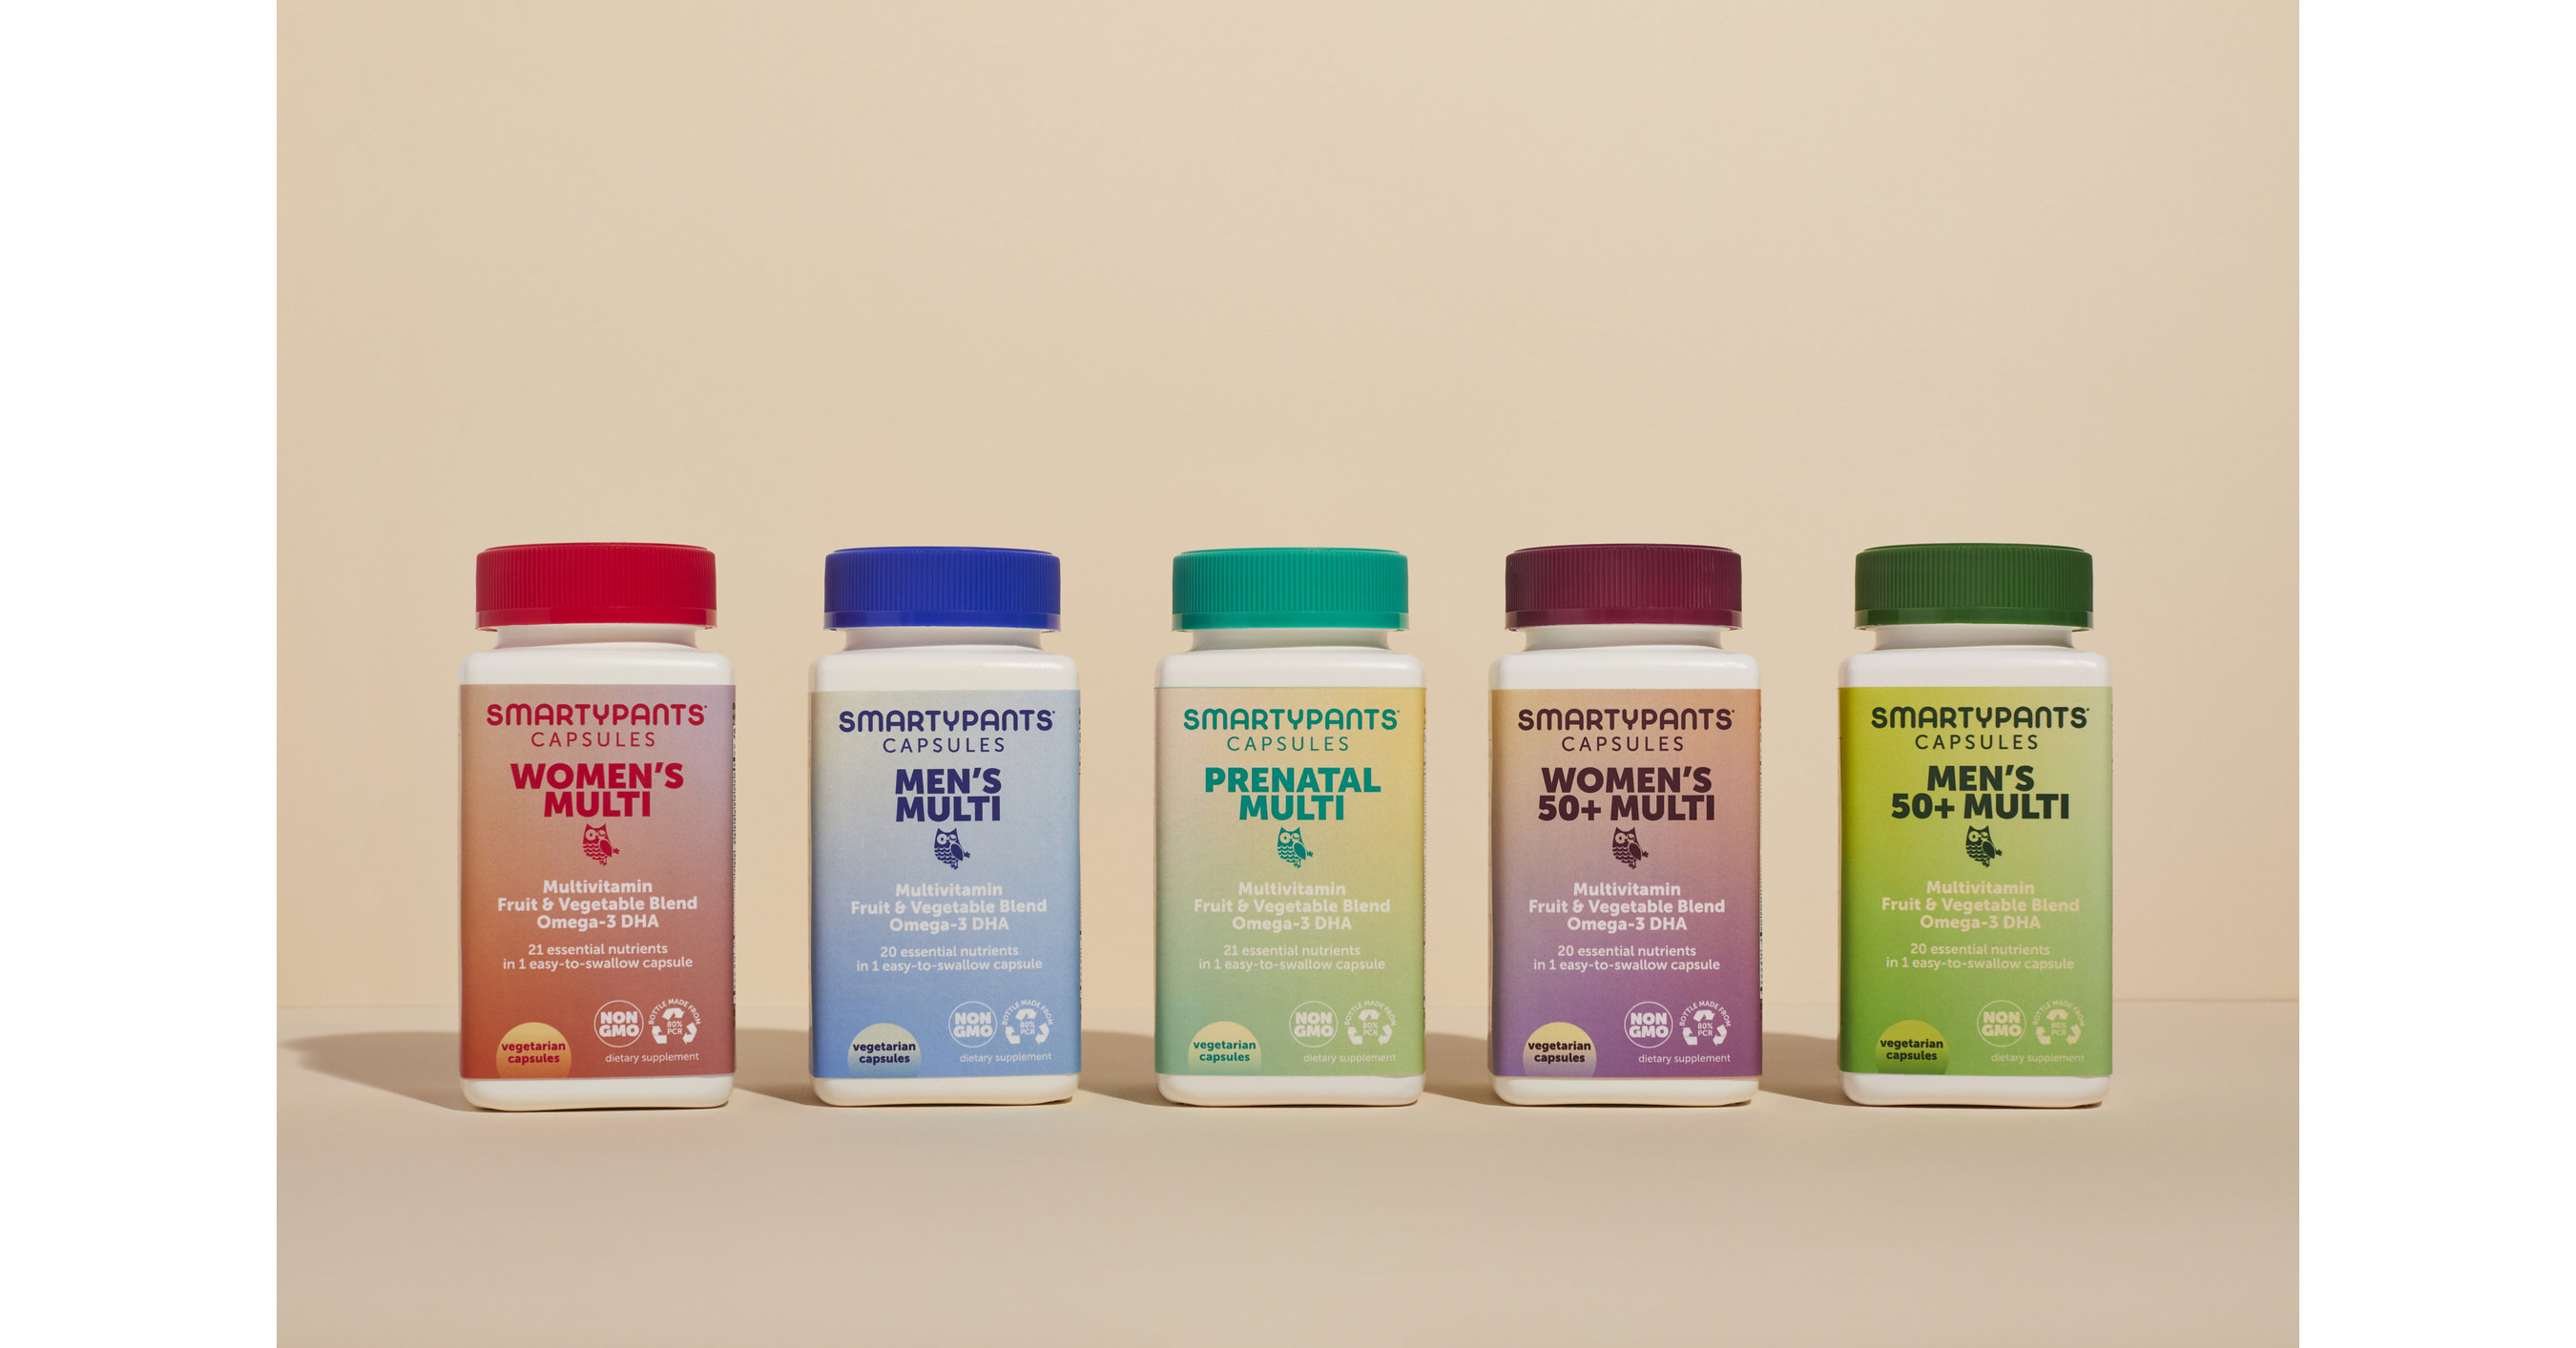 SmartyPants®, a Leading Gummy Supplement Brand, Introduces its New Capsule Line